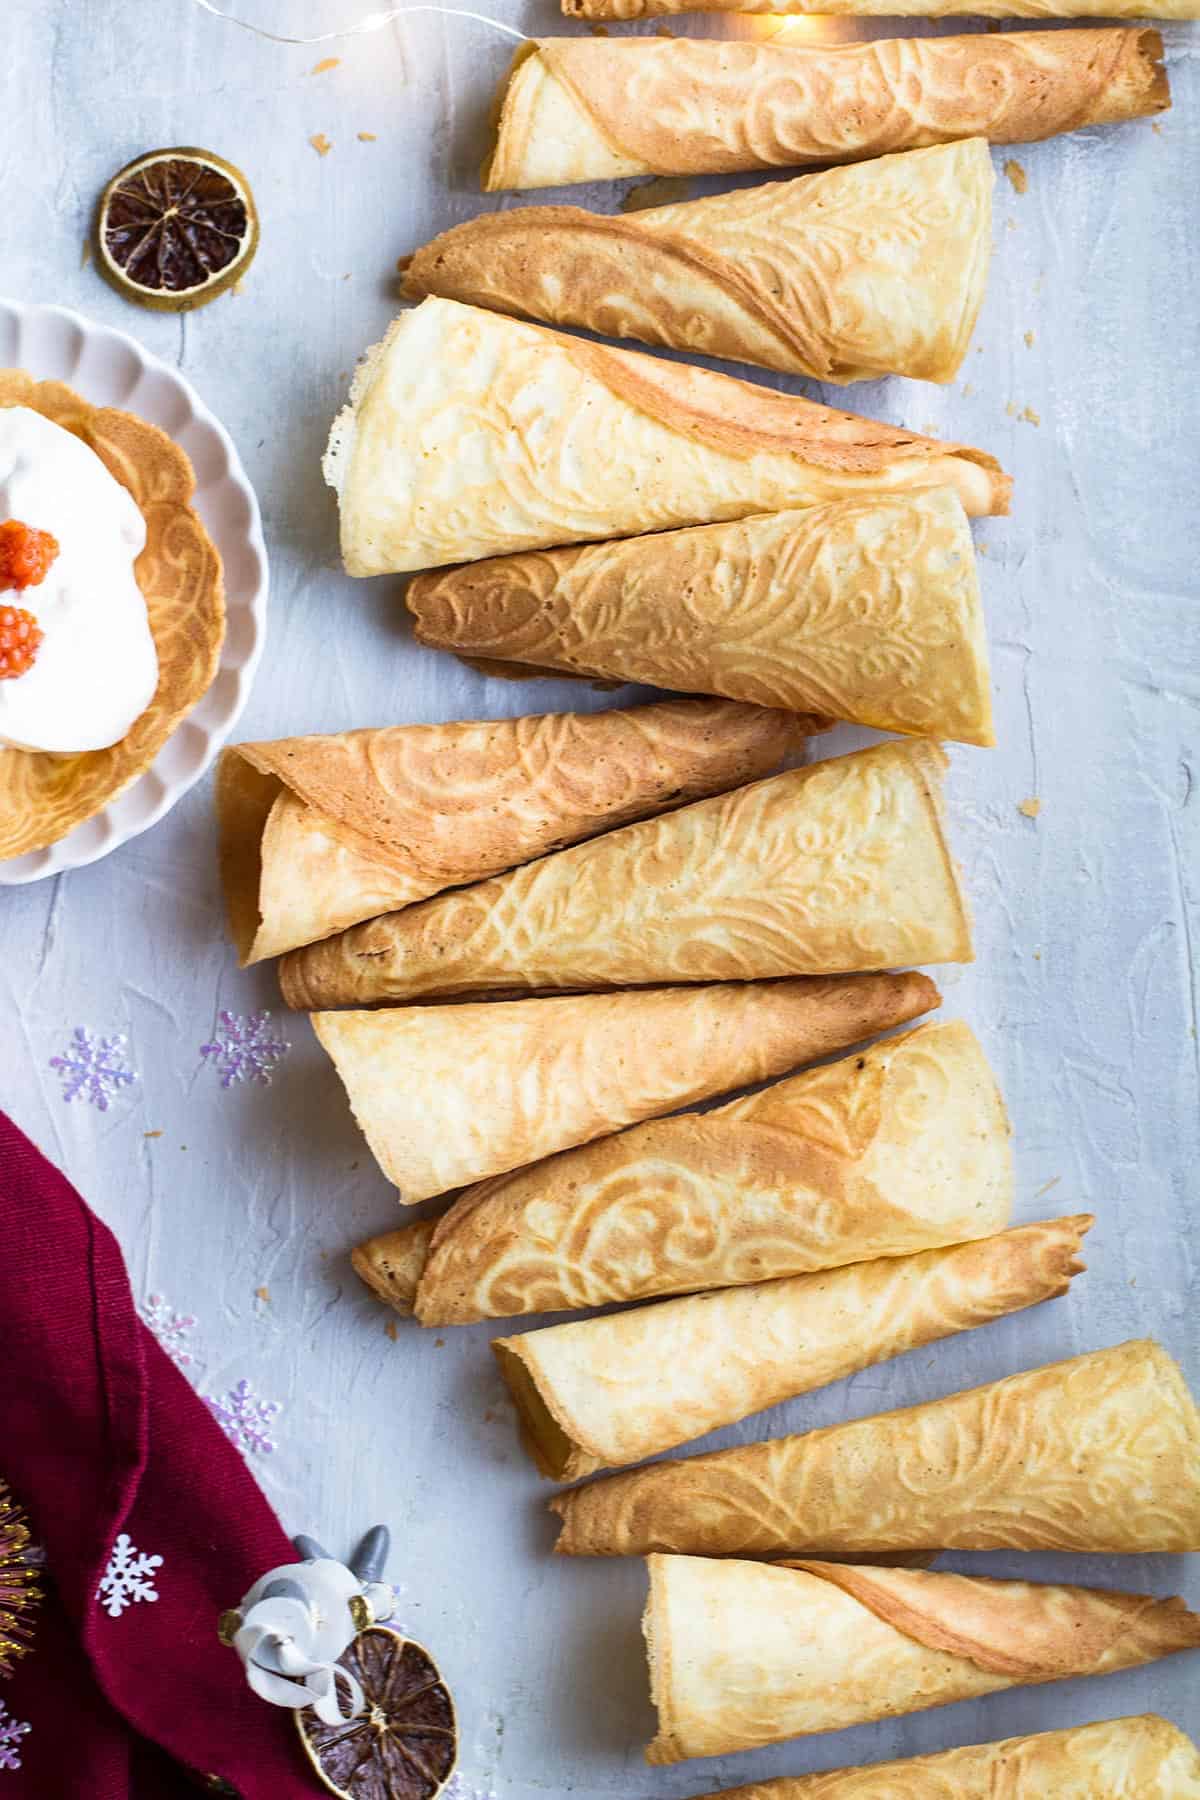 Krumkake cones after each other, creating a ribbon shape.